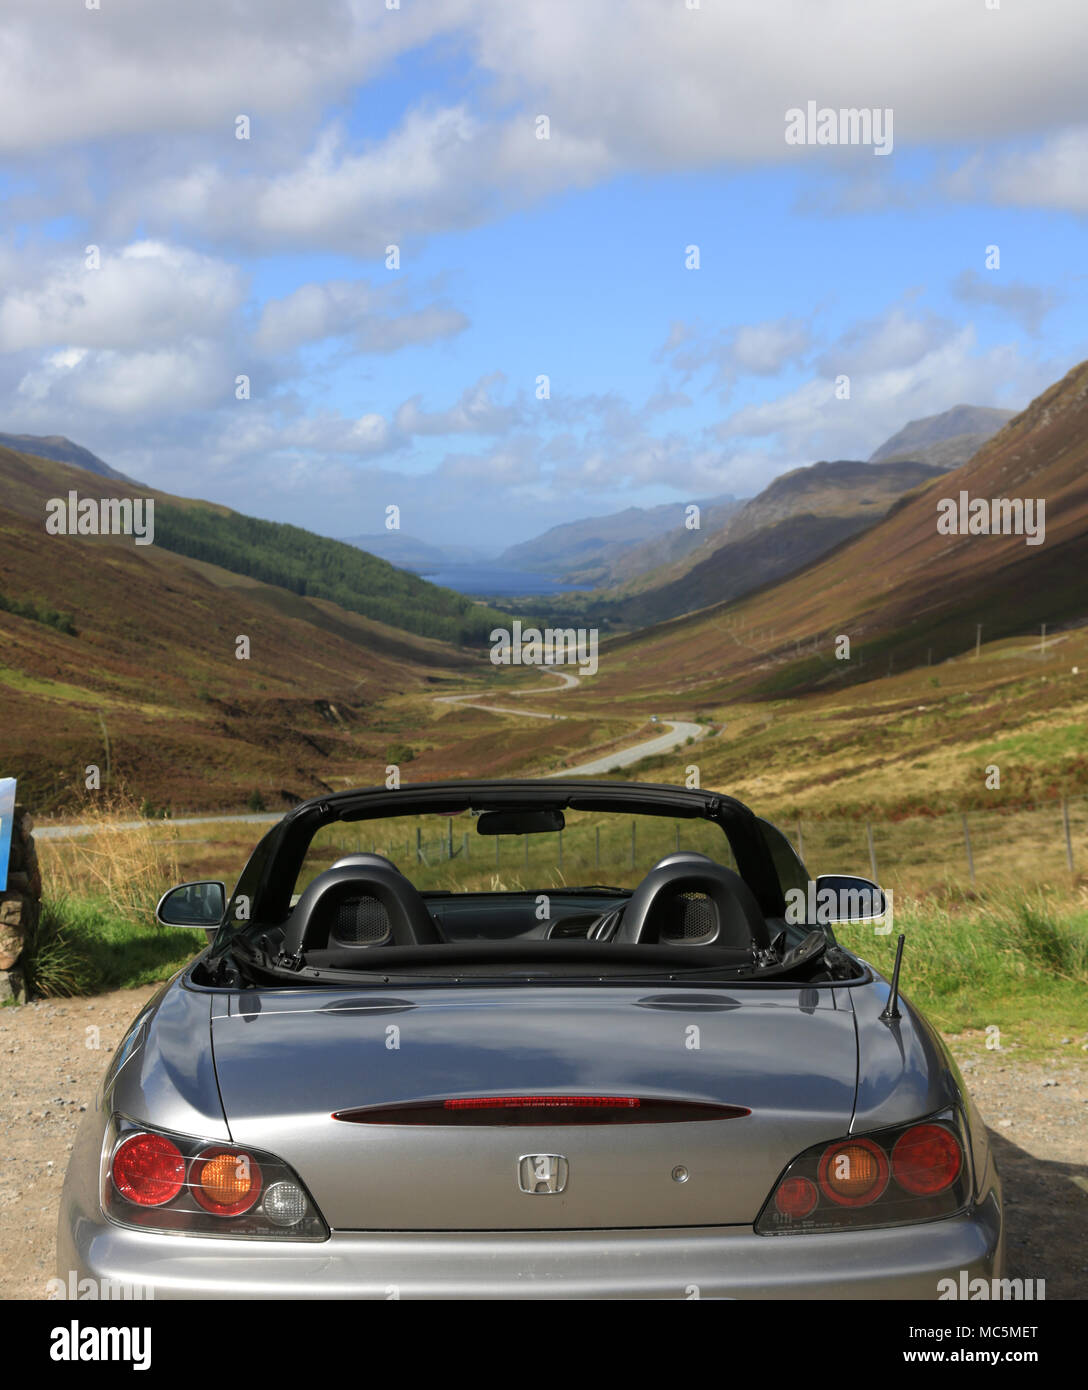 A silver sports car parked at the Glen Docherty viewpoint, part of the North coast 500 scenic drive, Scotland,uk. Stock Photo